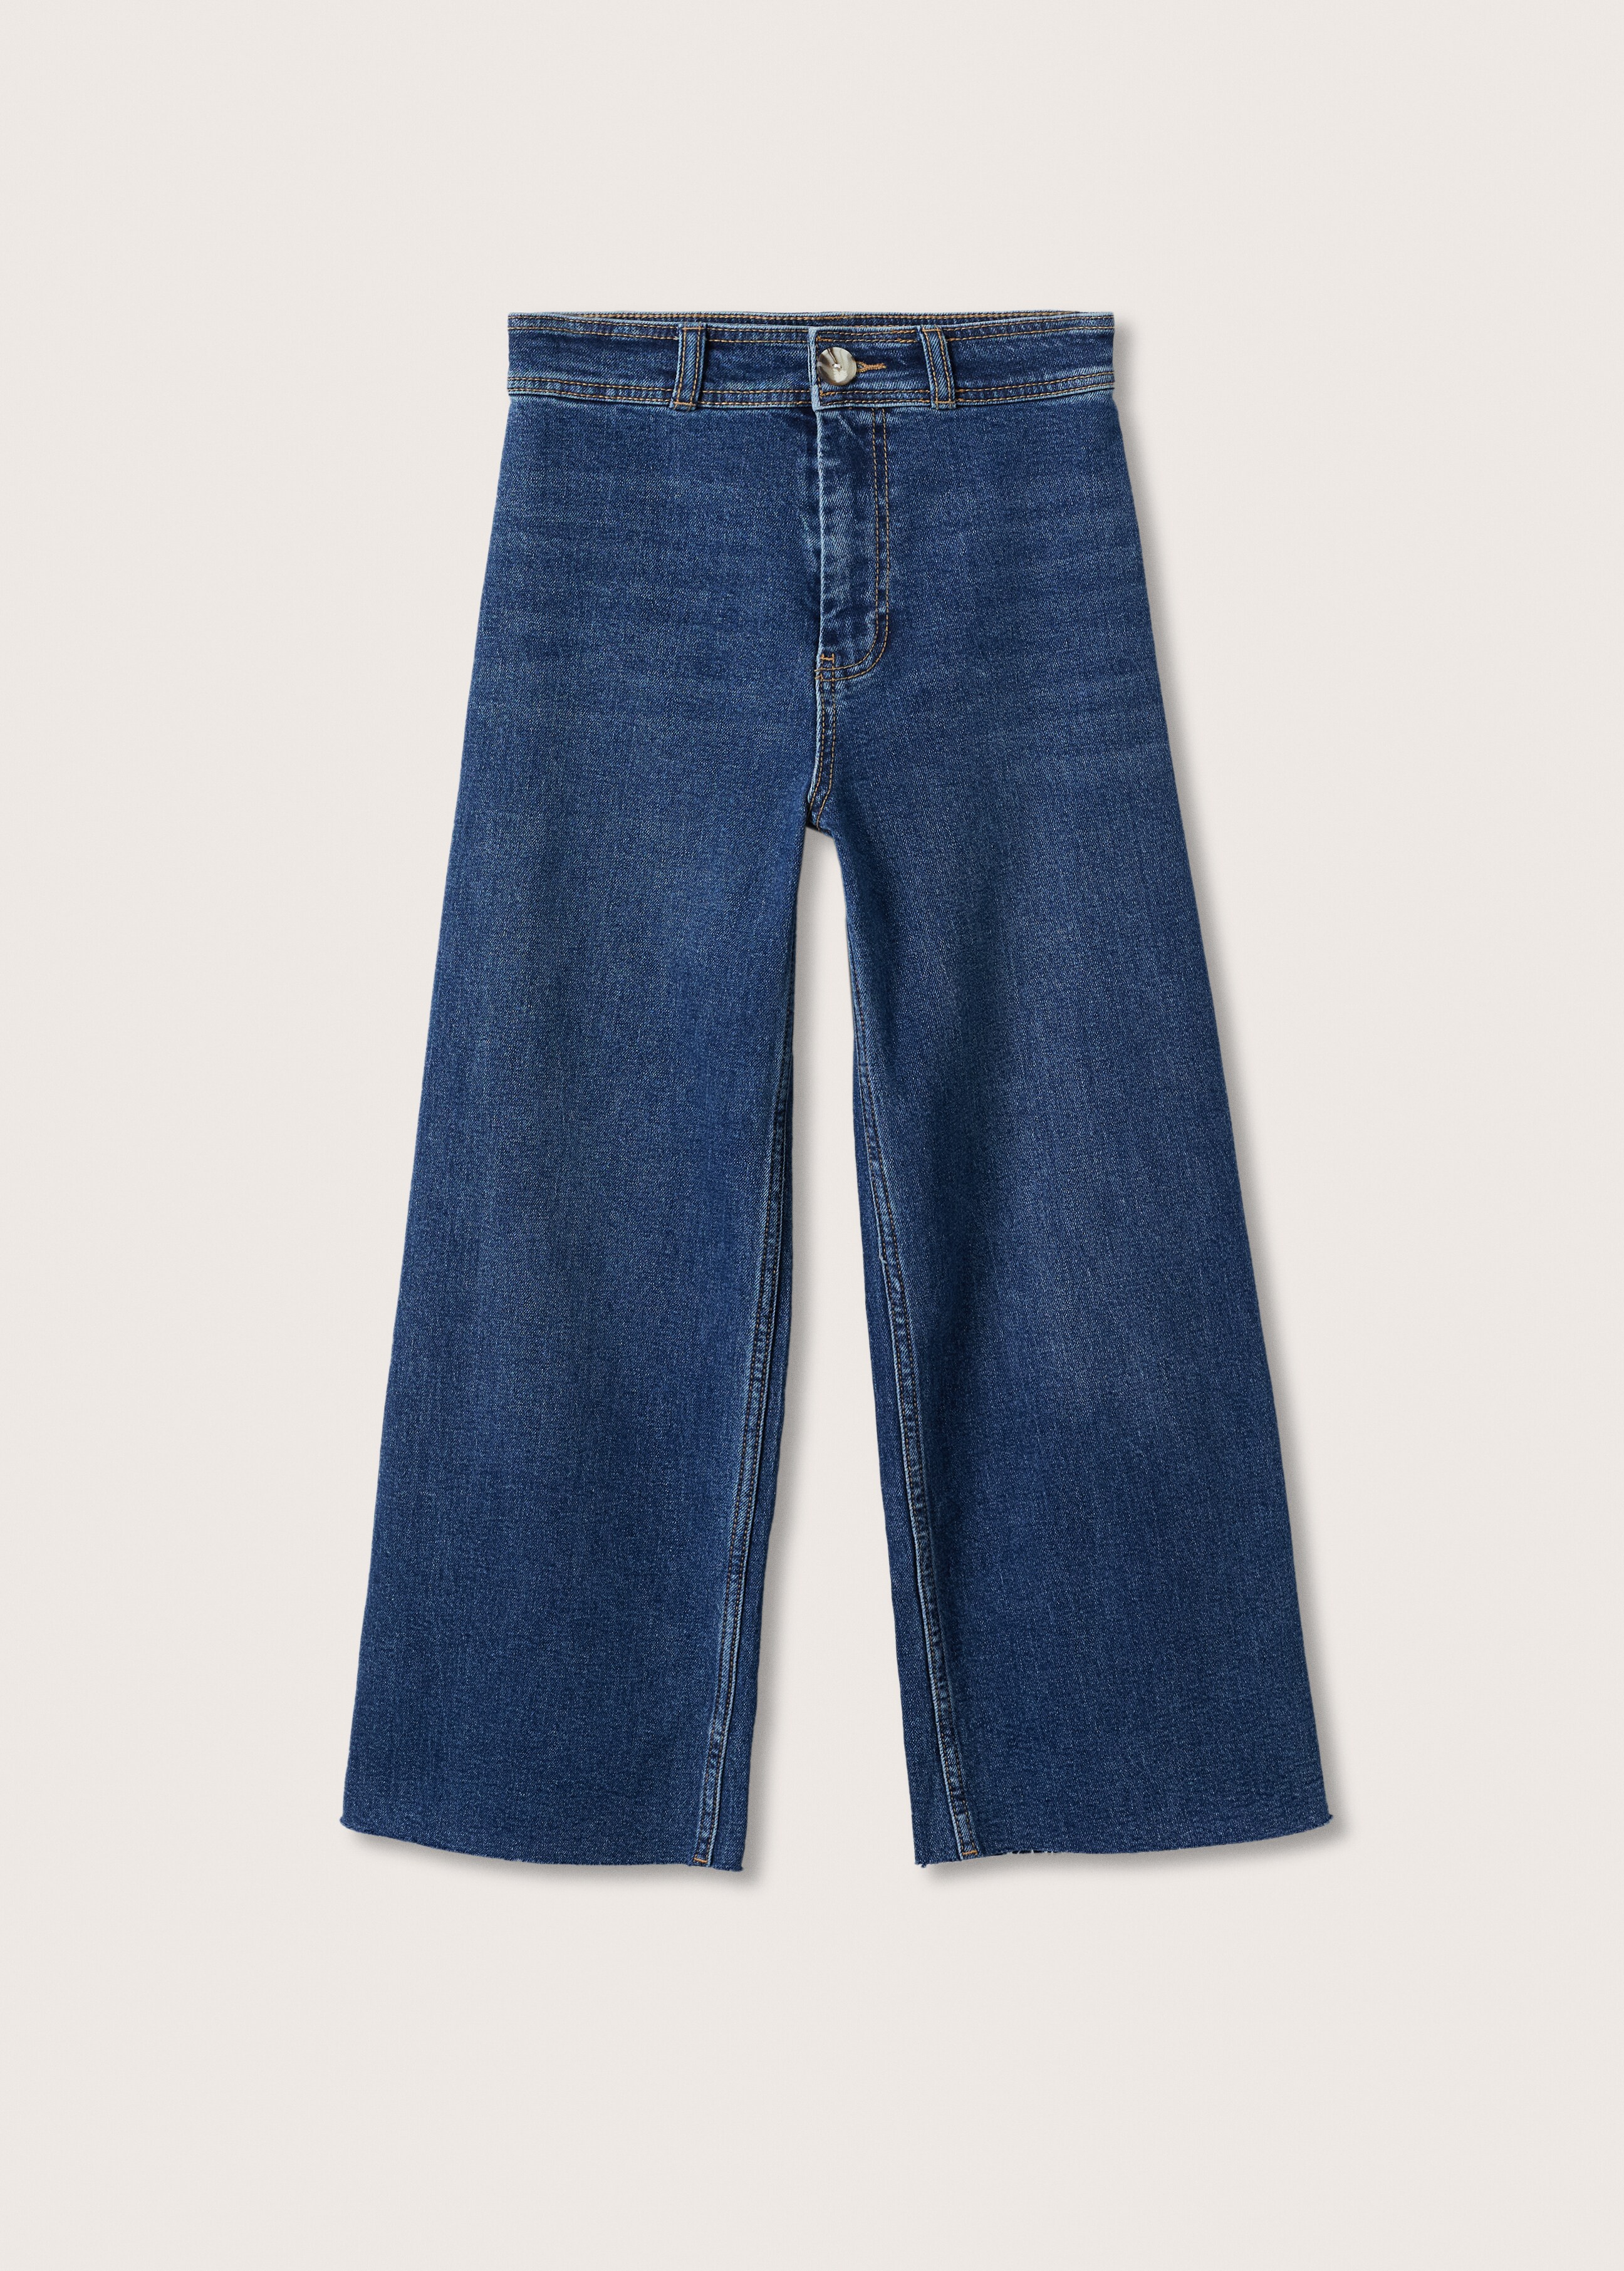 Culotte frayed jeans - Article without model